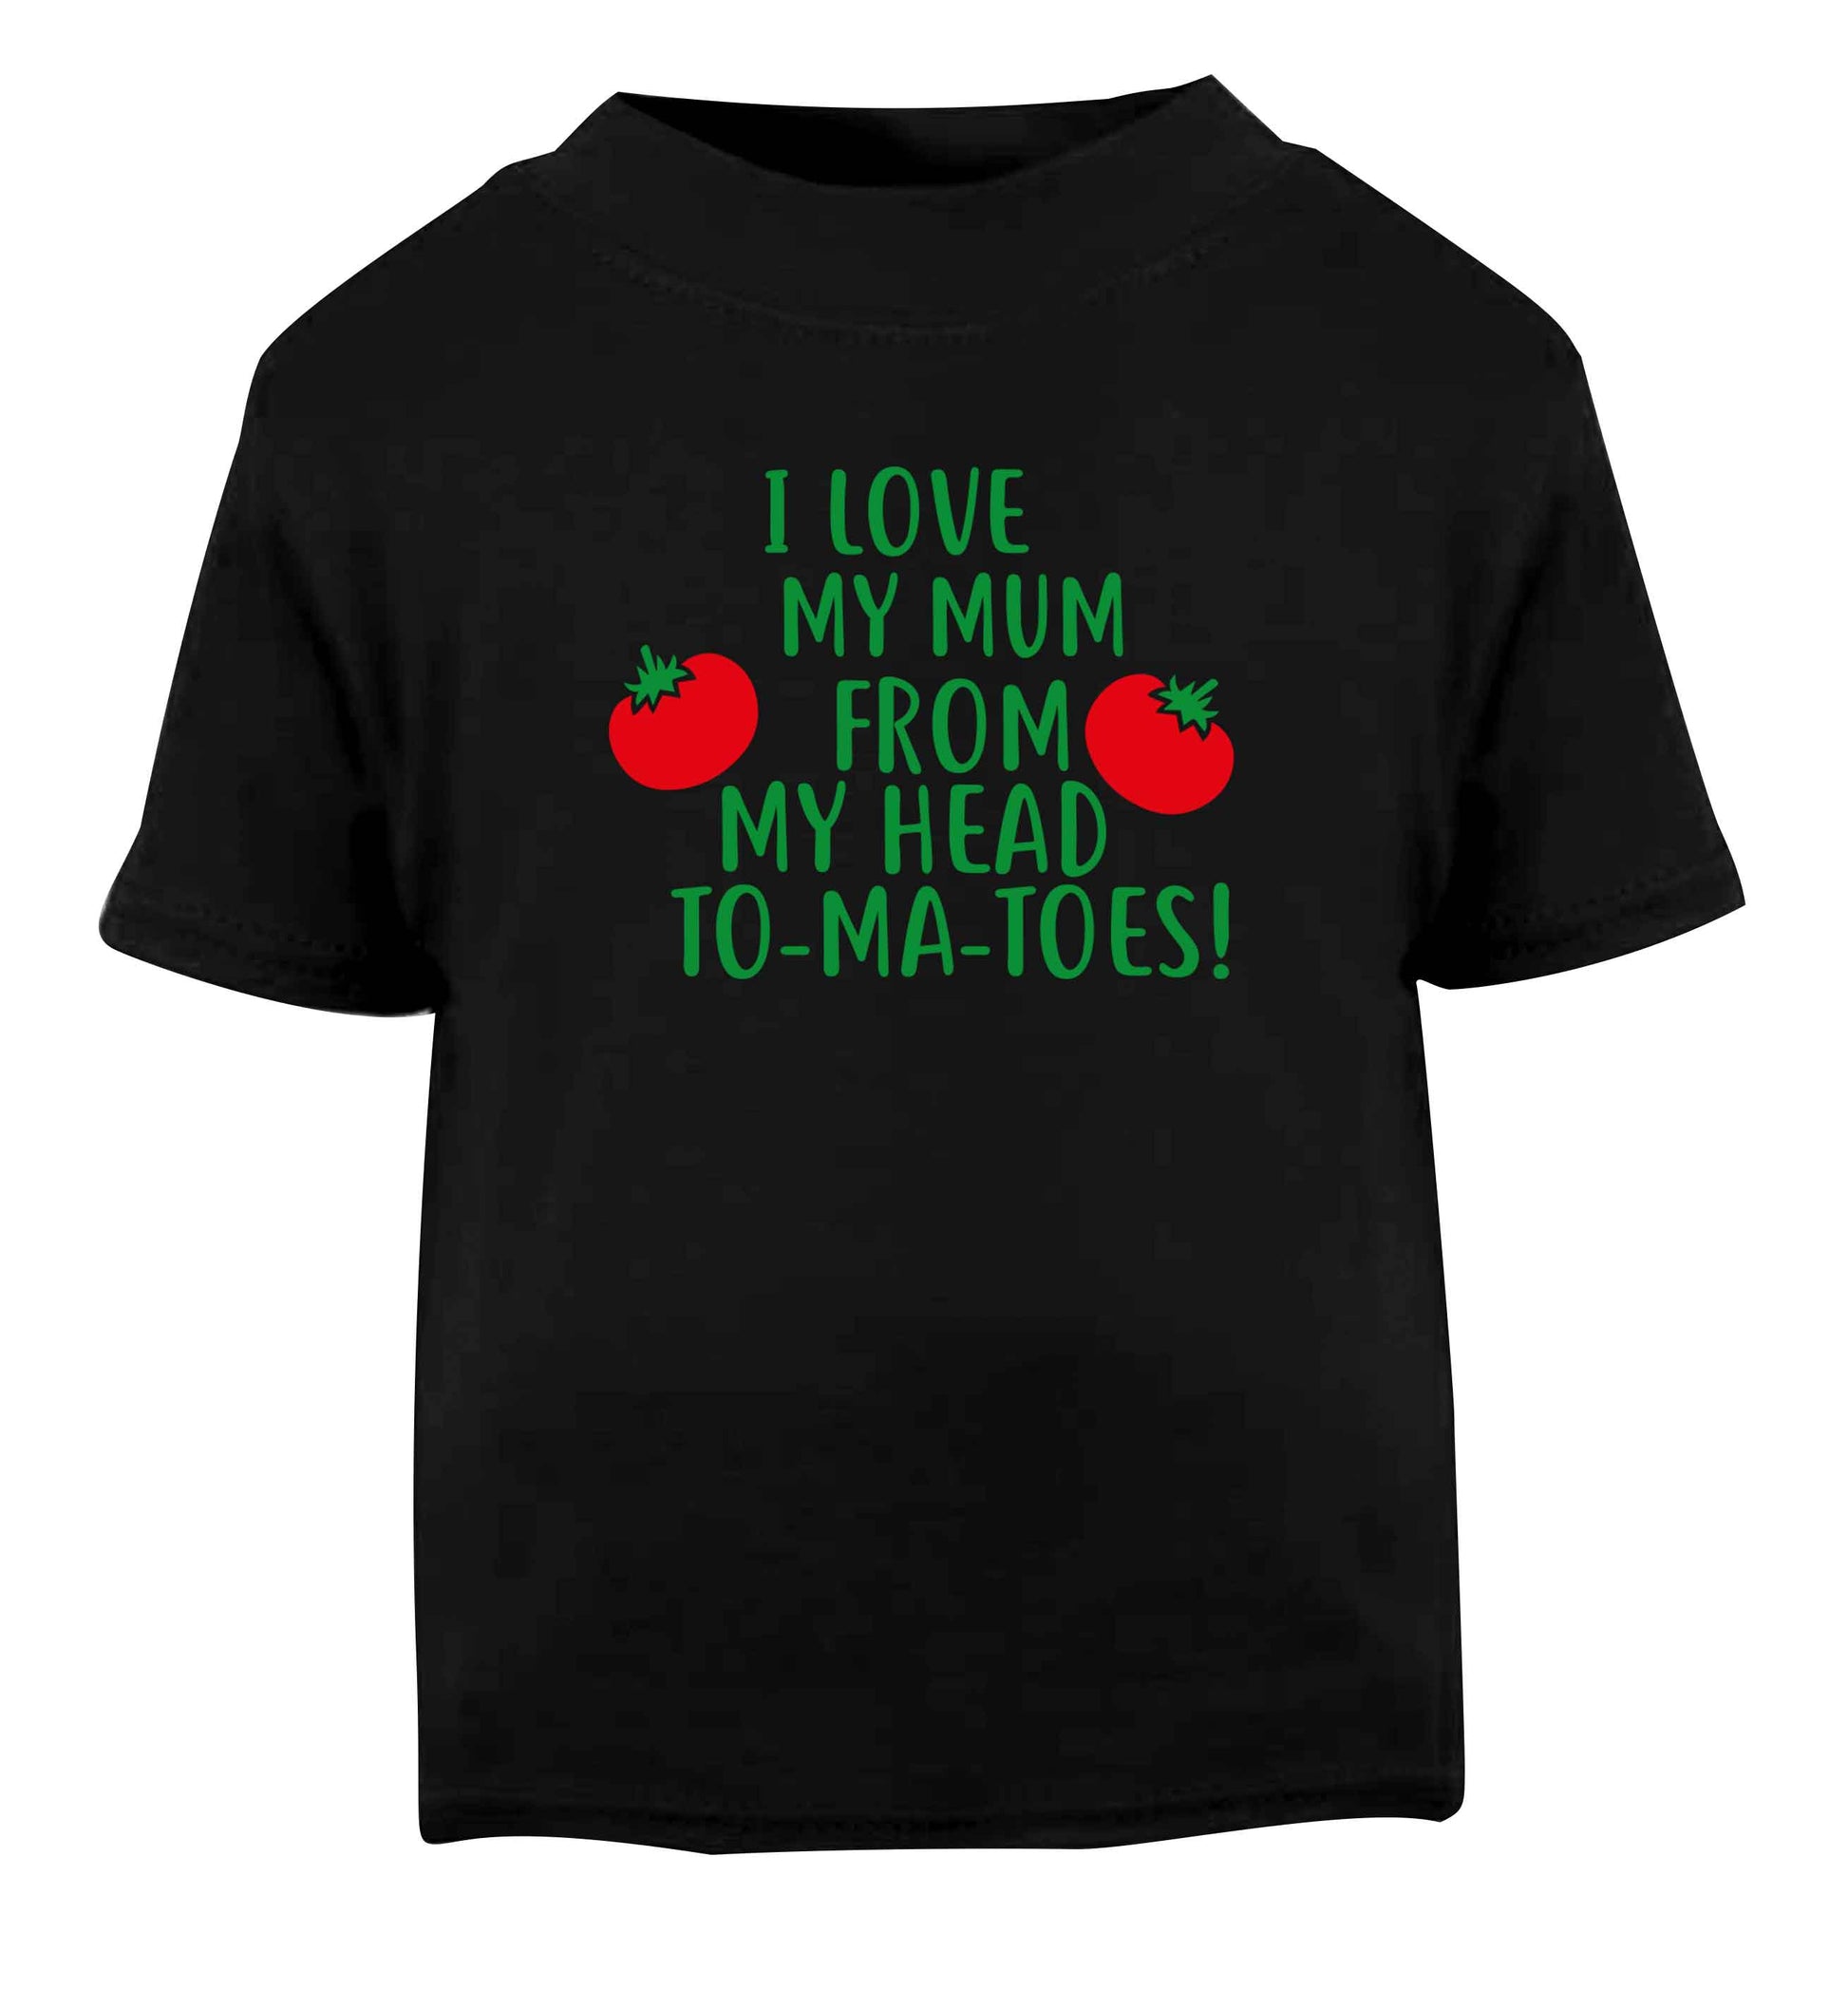 I love my mum from my head to-my-toes! Black baby toddler Tshirt 2 years